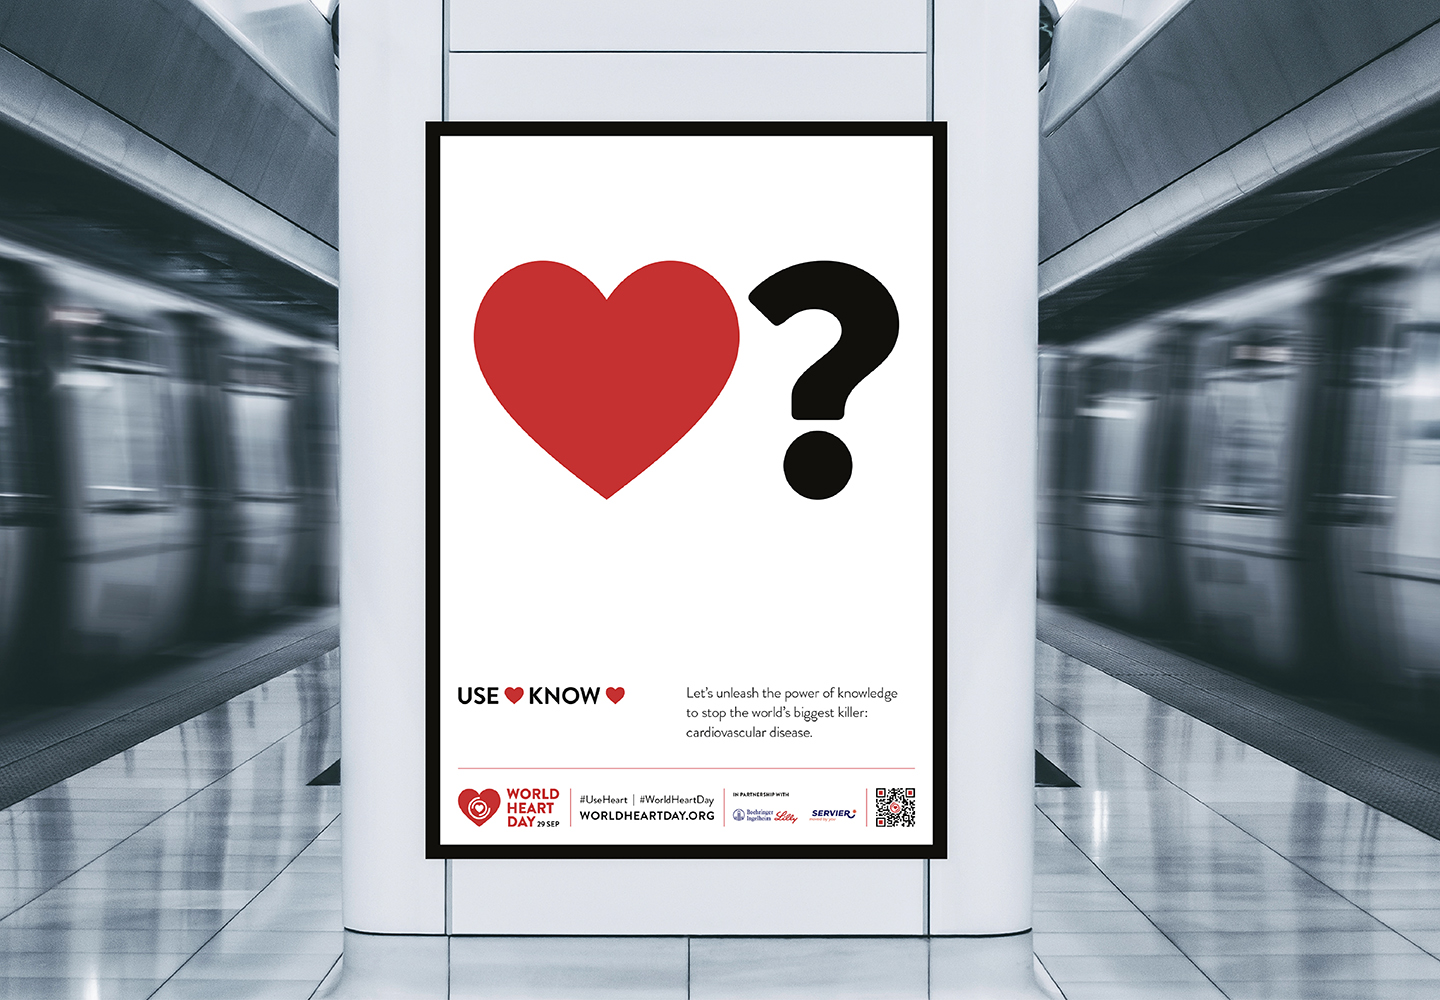 World Heart Day 2023 campaign banner at a train station